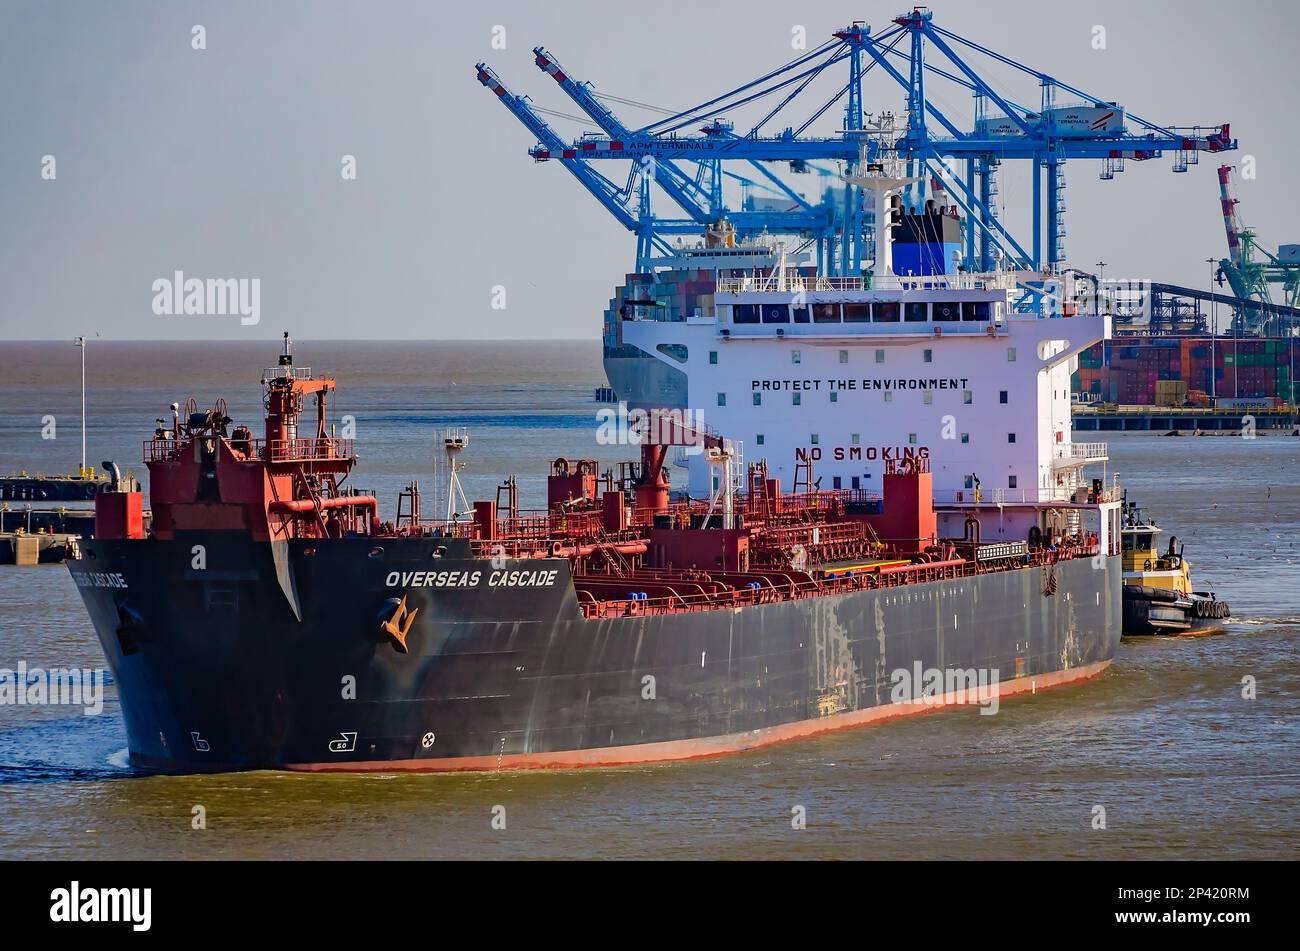 Overseas Cascade is pictured as it enters the Port of Mobile assisted by the tugboat Lisa Cooper, March 3, 2023, in Mobile, Alabama. Stock Photo